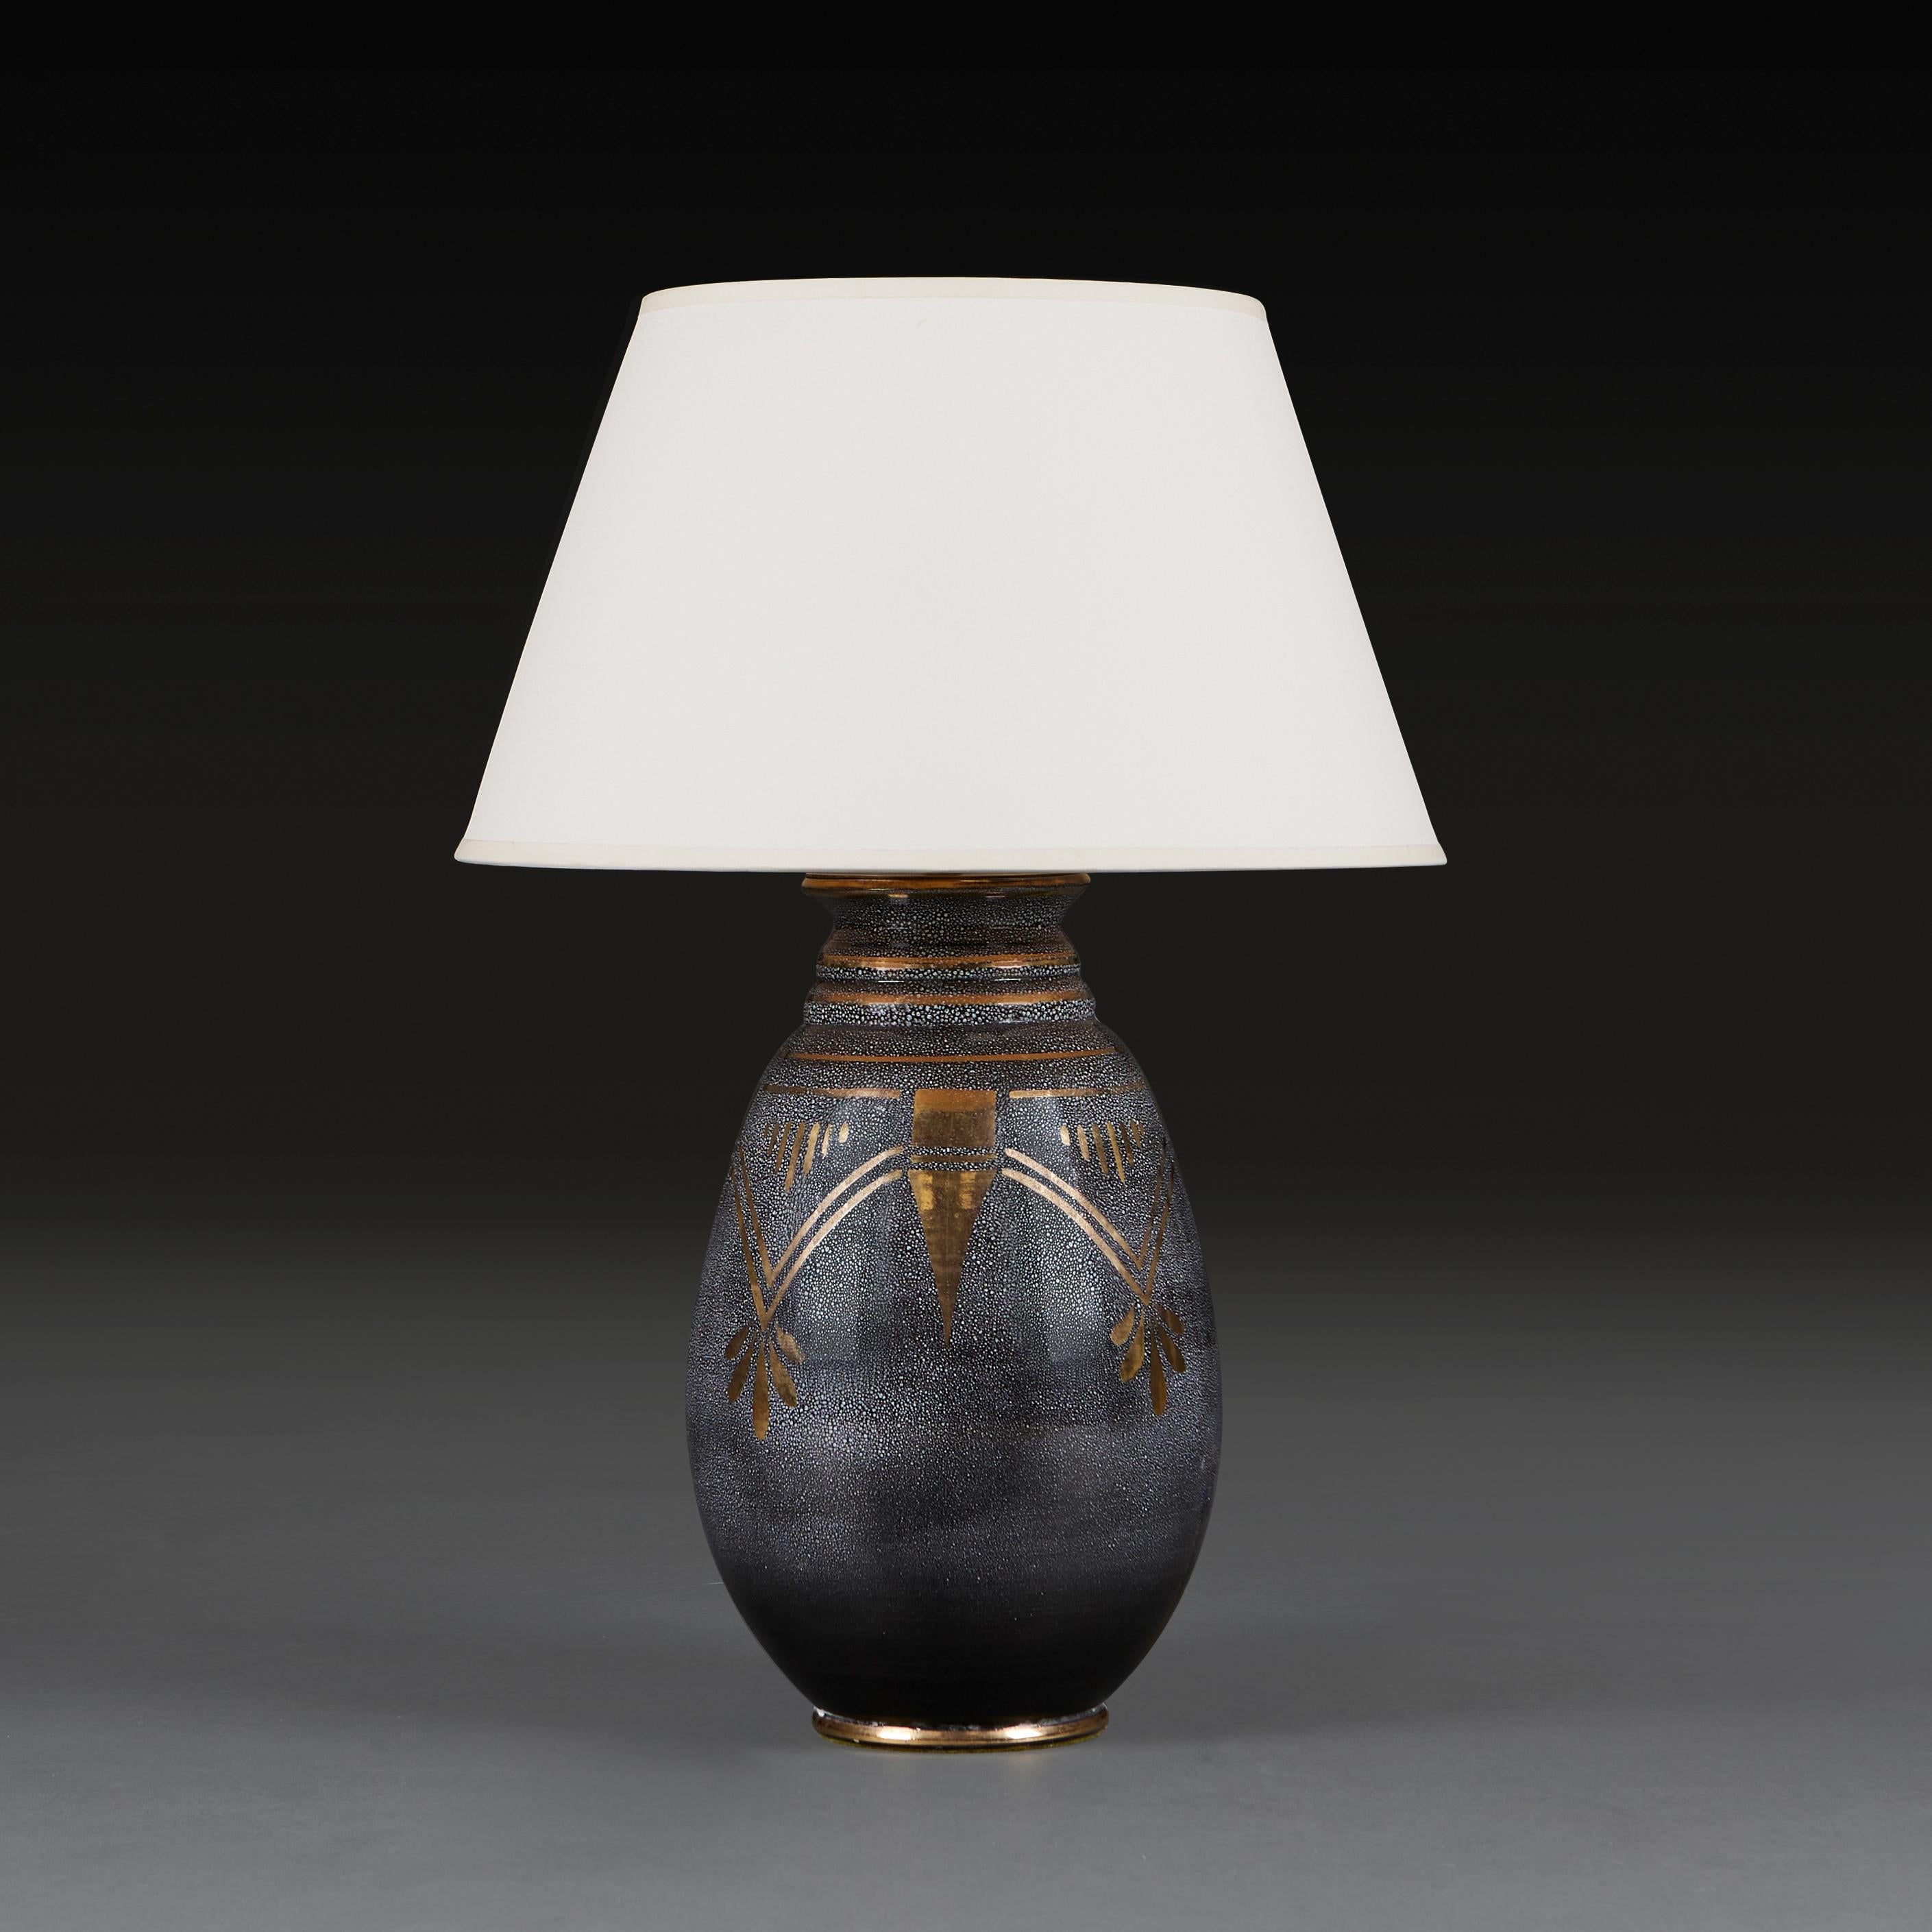 An Art Deco vase with unusual shagreen simulated grey speckled glaze, with gilt glaze overlay in geometric motives, now as a lamp. 
France, circa 1930
Height of vase   36.00cm
Height with shade   61.00cm
Diameter of base  12.00cm

Please note: Does